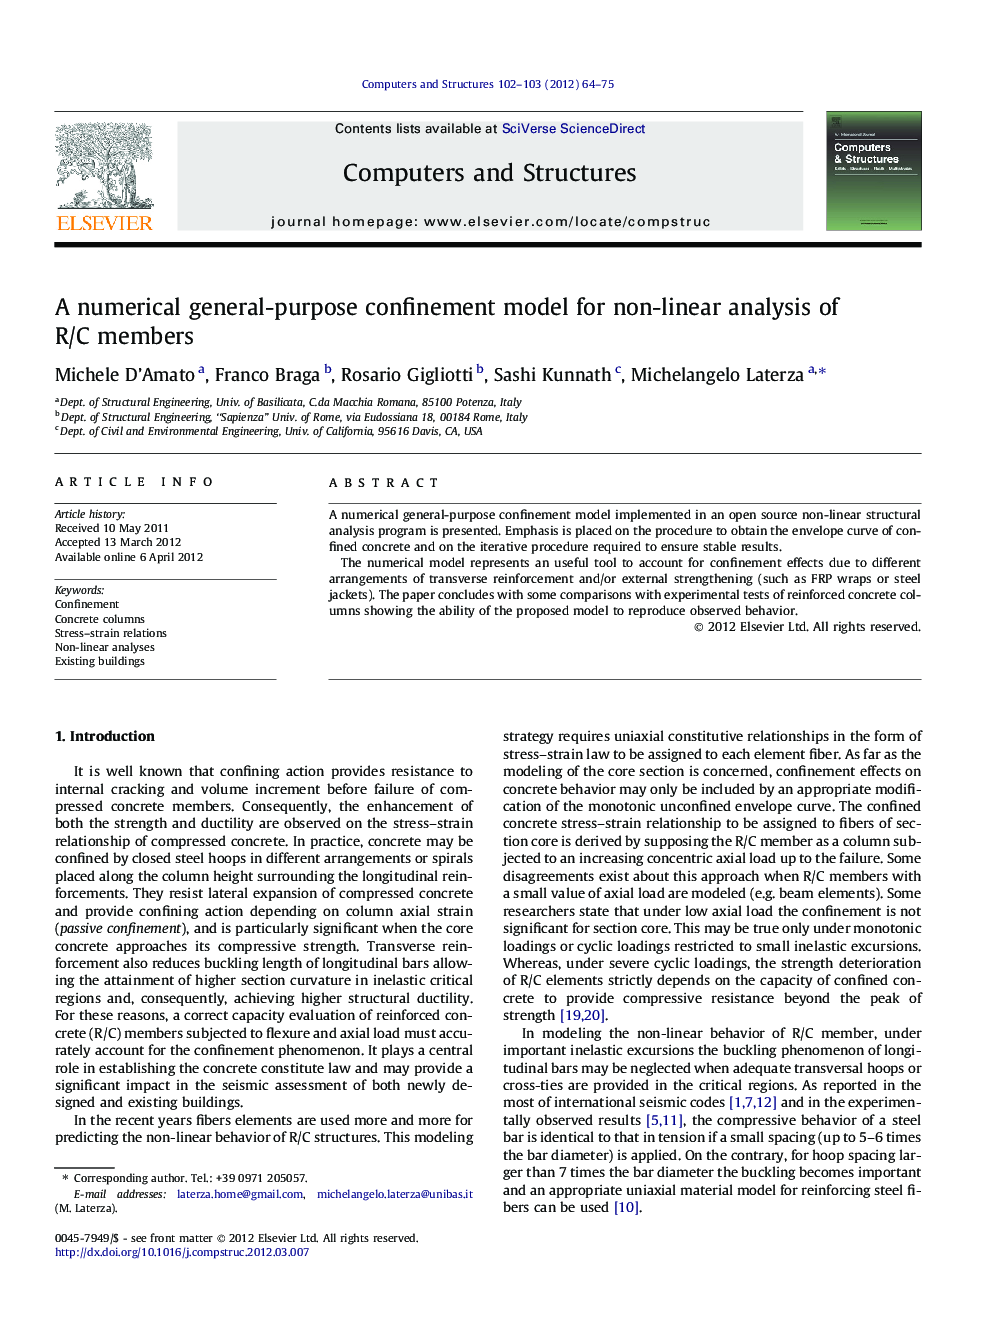 A numerical general-purpose confinement model for non-linear analysis of R/C members